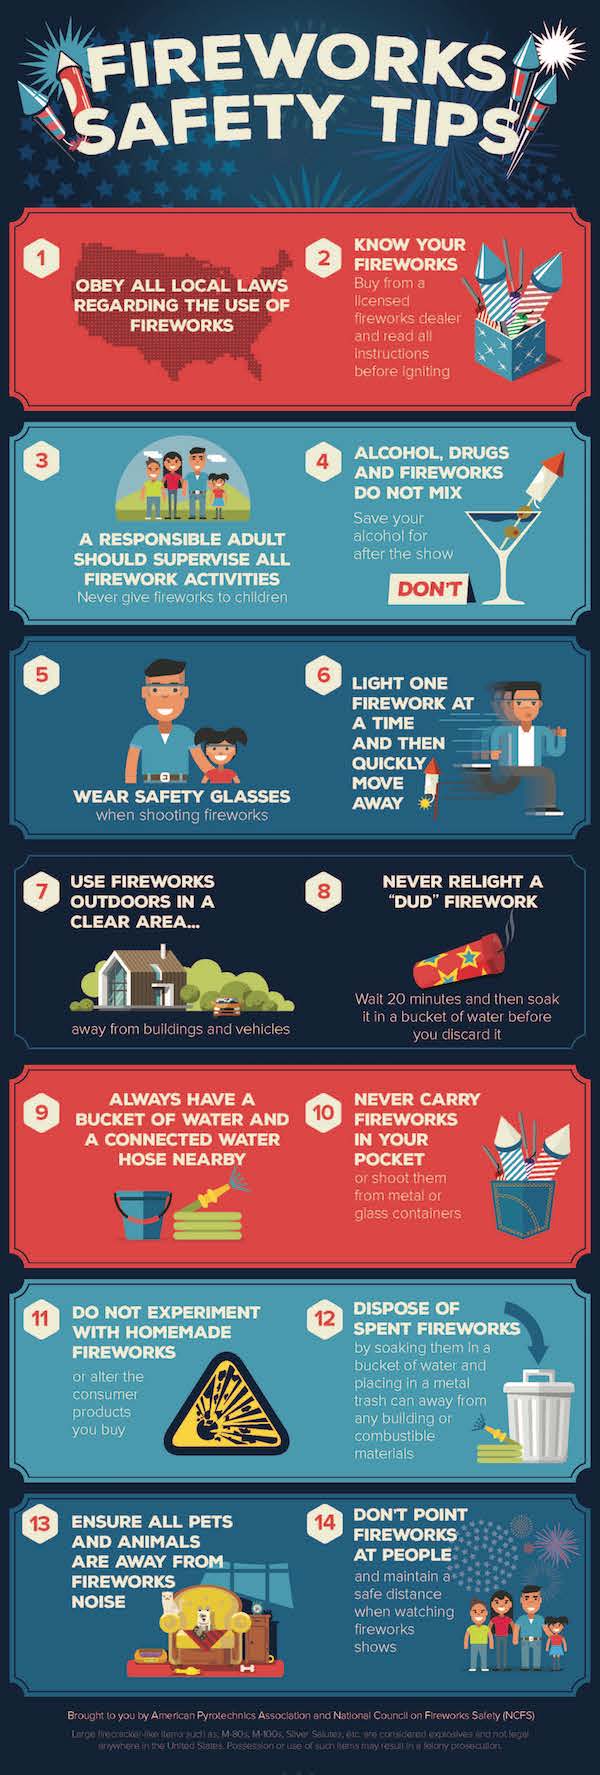 fireworks-safety-tips-infographic